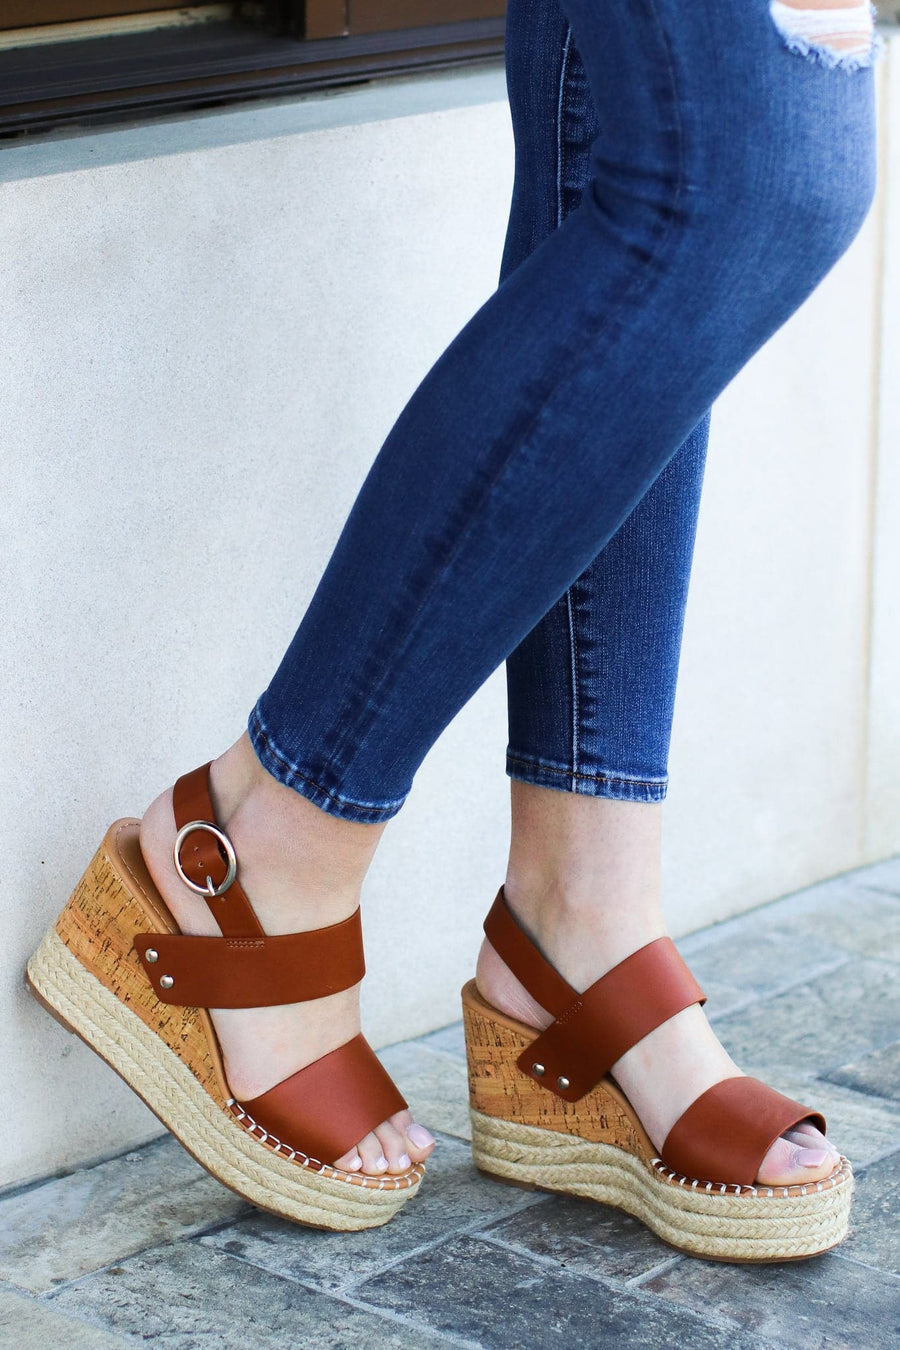 5.5 / Tan The Right Moves Espadrille Wedges - Tan - FINAL SALE - kitchencabinetmagic